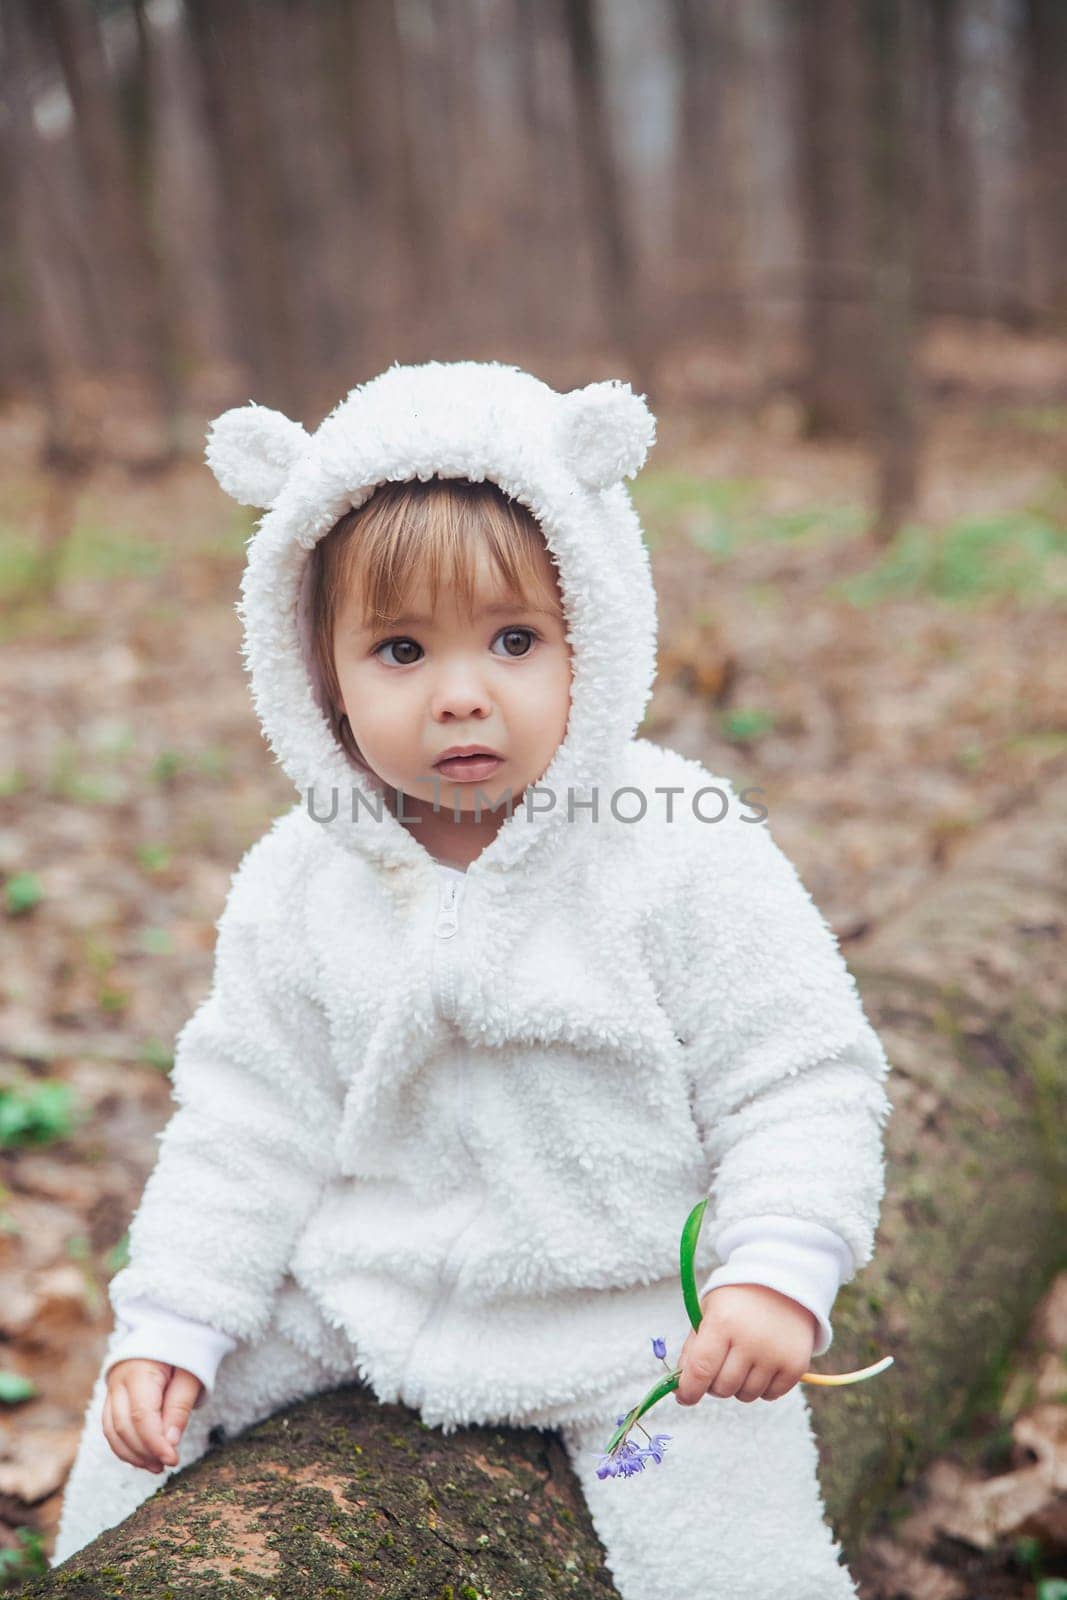 Adorable baby in a bear costume in the forest by a fallen tree by Viktor_Osypenko